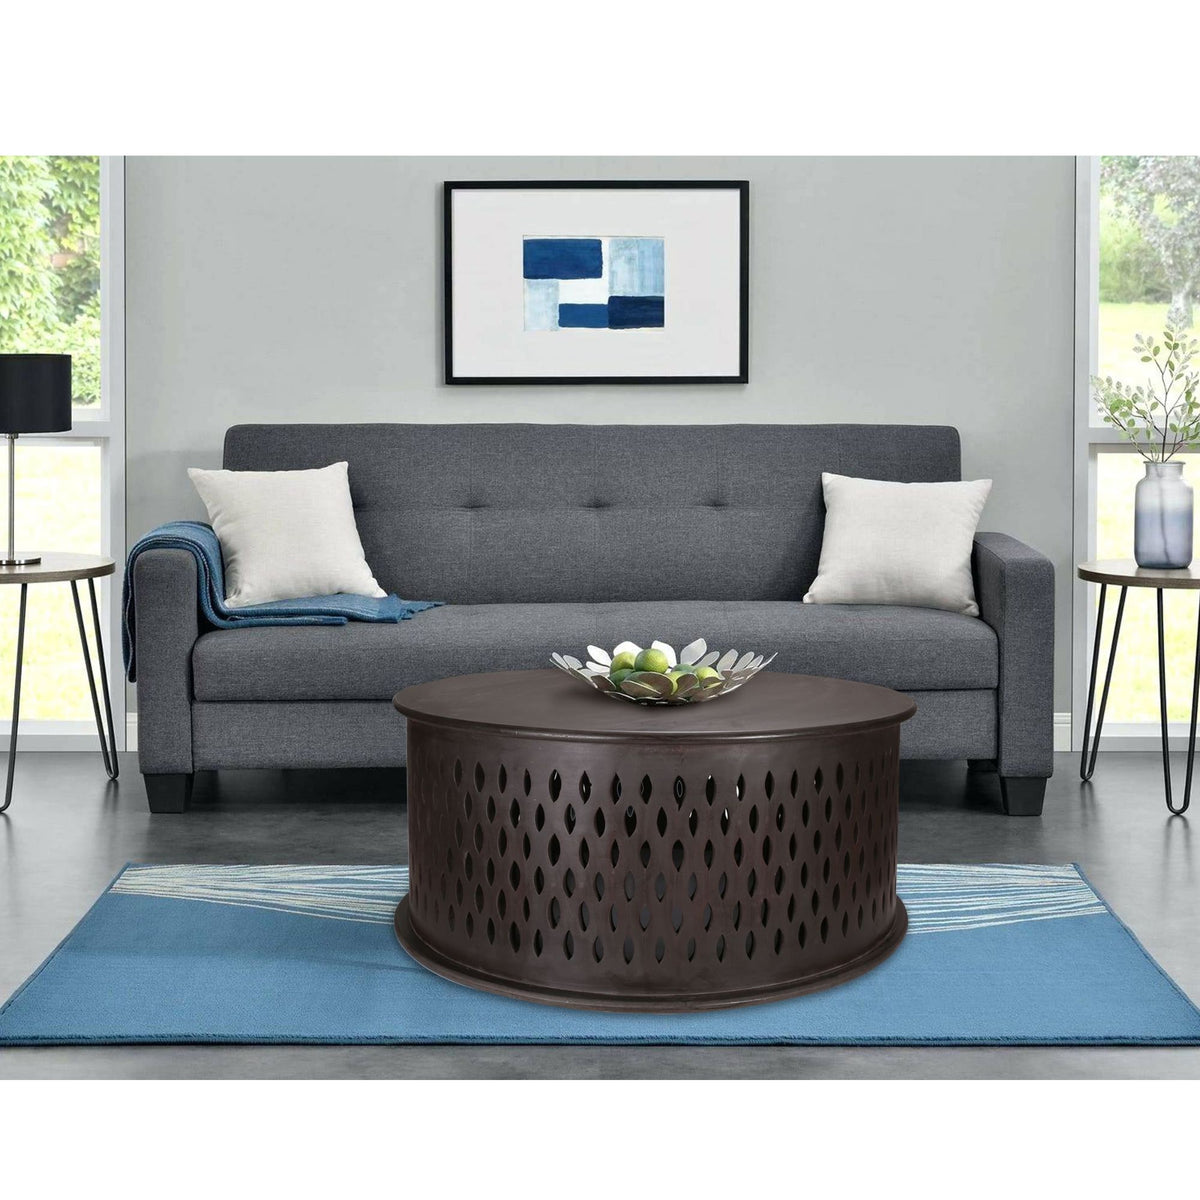 Pansy Round Wooden Coffee Table in Brown - 80cm - Notbrand